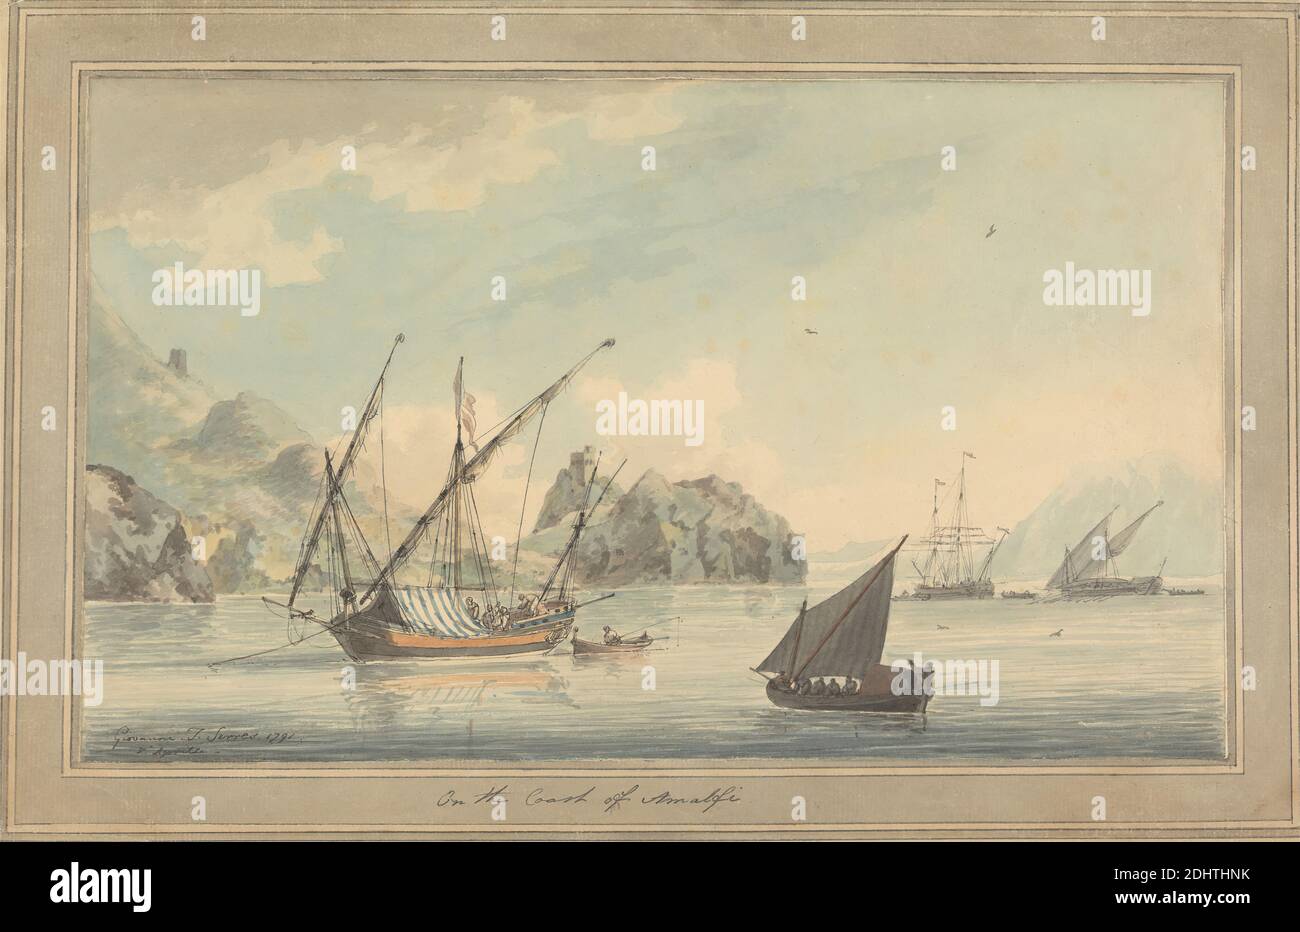 Shipping off the Coast at Amalfi, John Thomas Serres, 1759–1825, British, 1791, Watercolor with pen and black ink over graphite on medium, slightly textured, beige wove paper, Sheet: 8 1/2 x 14 5/16in. (21.6 x 36.4cm) and Sheet: 8 1/2 × 14 3/8 inches (21.6 × 36.5 cm), Amalfi Stock Photo